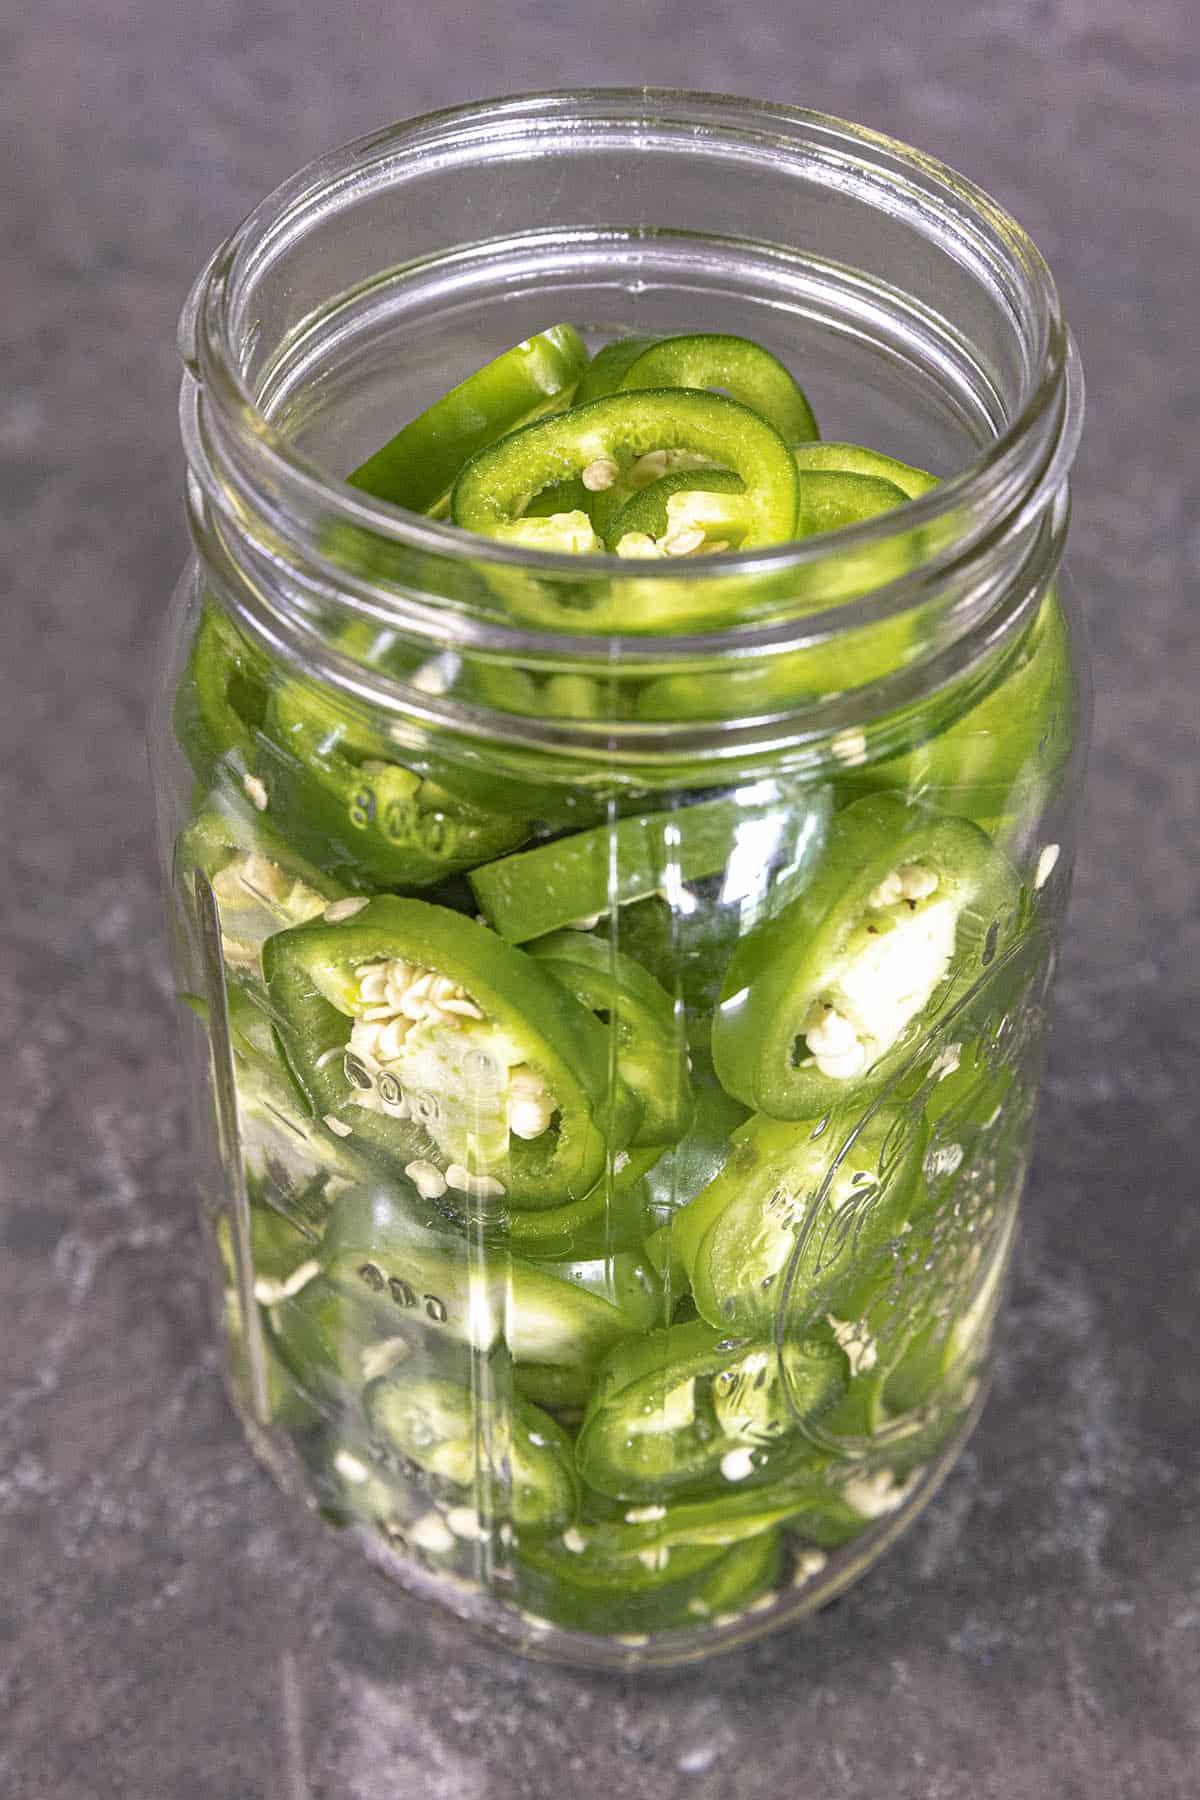 Jalapeno slices in a jar ready for pickling